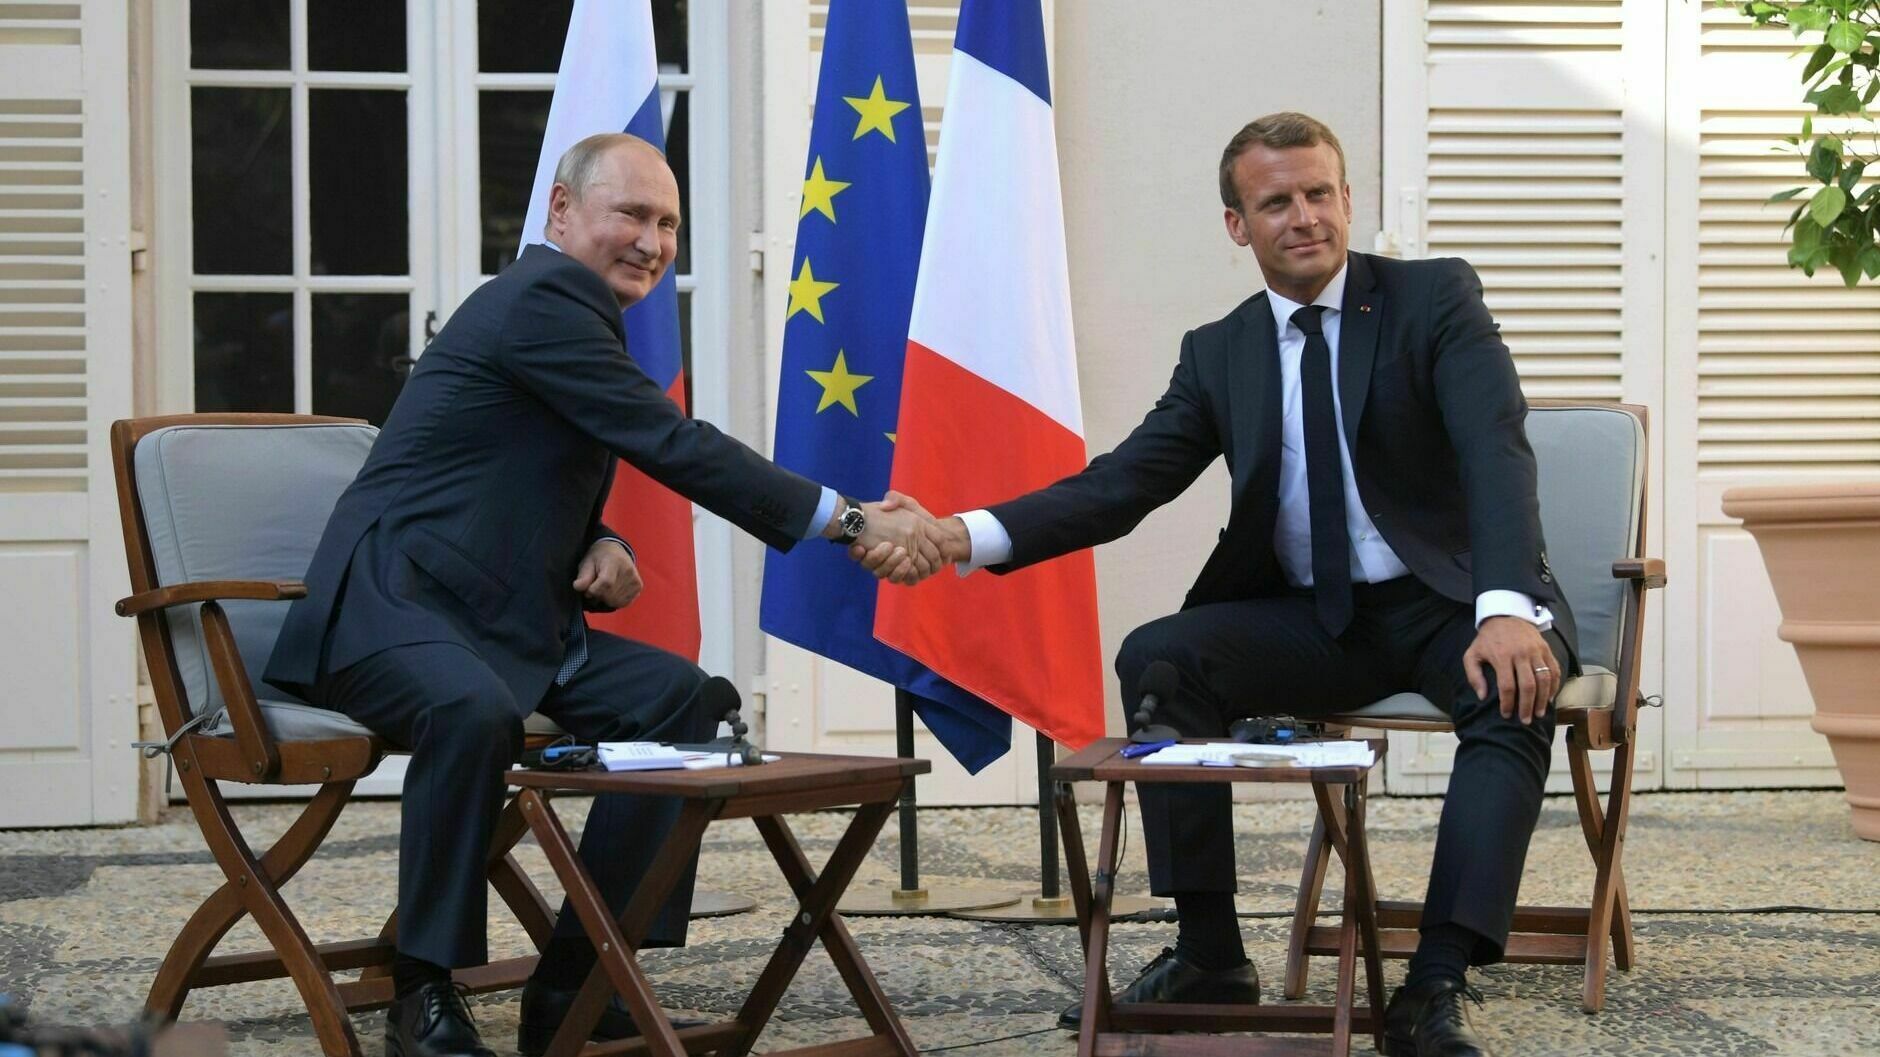 French President urged to "build peace" with Russia